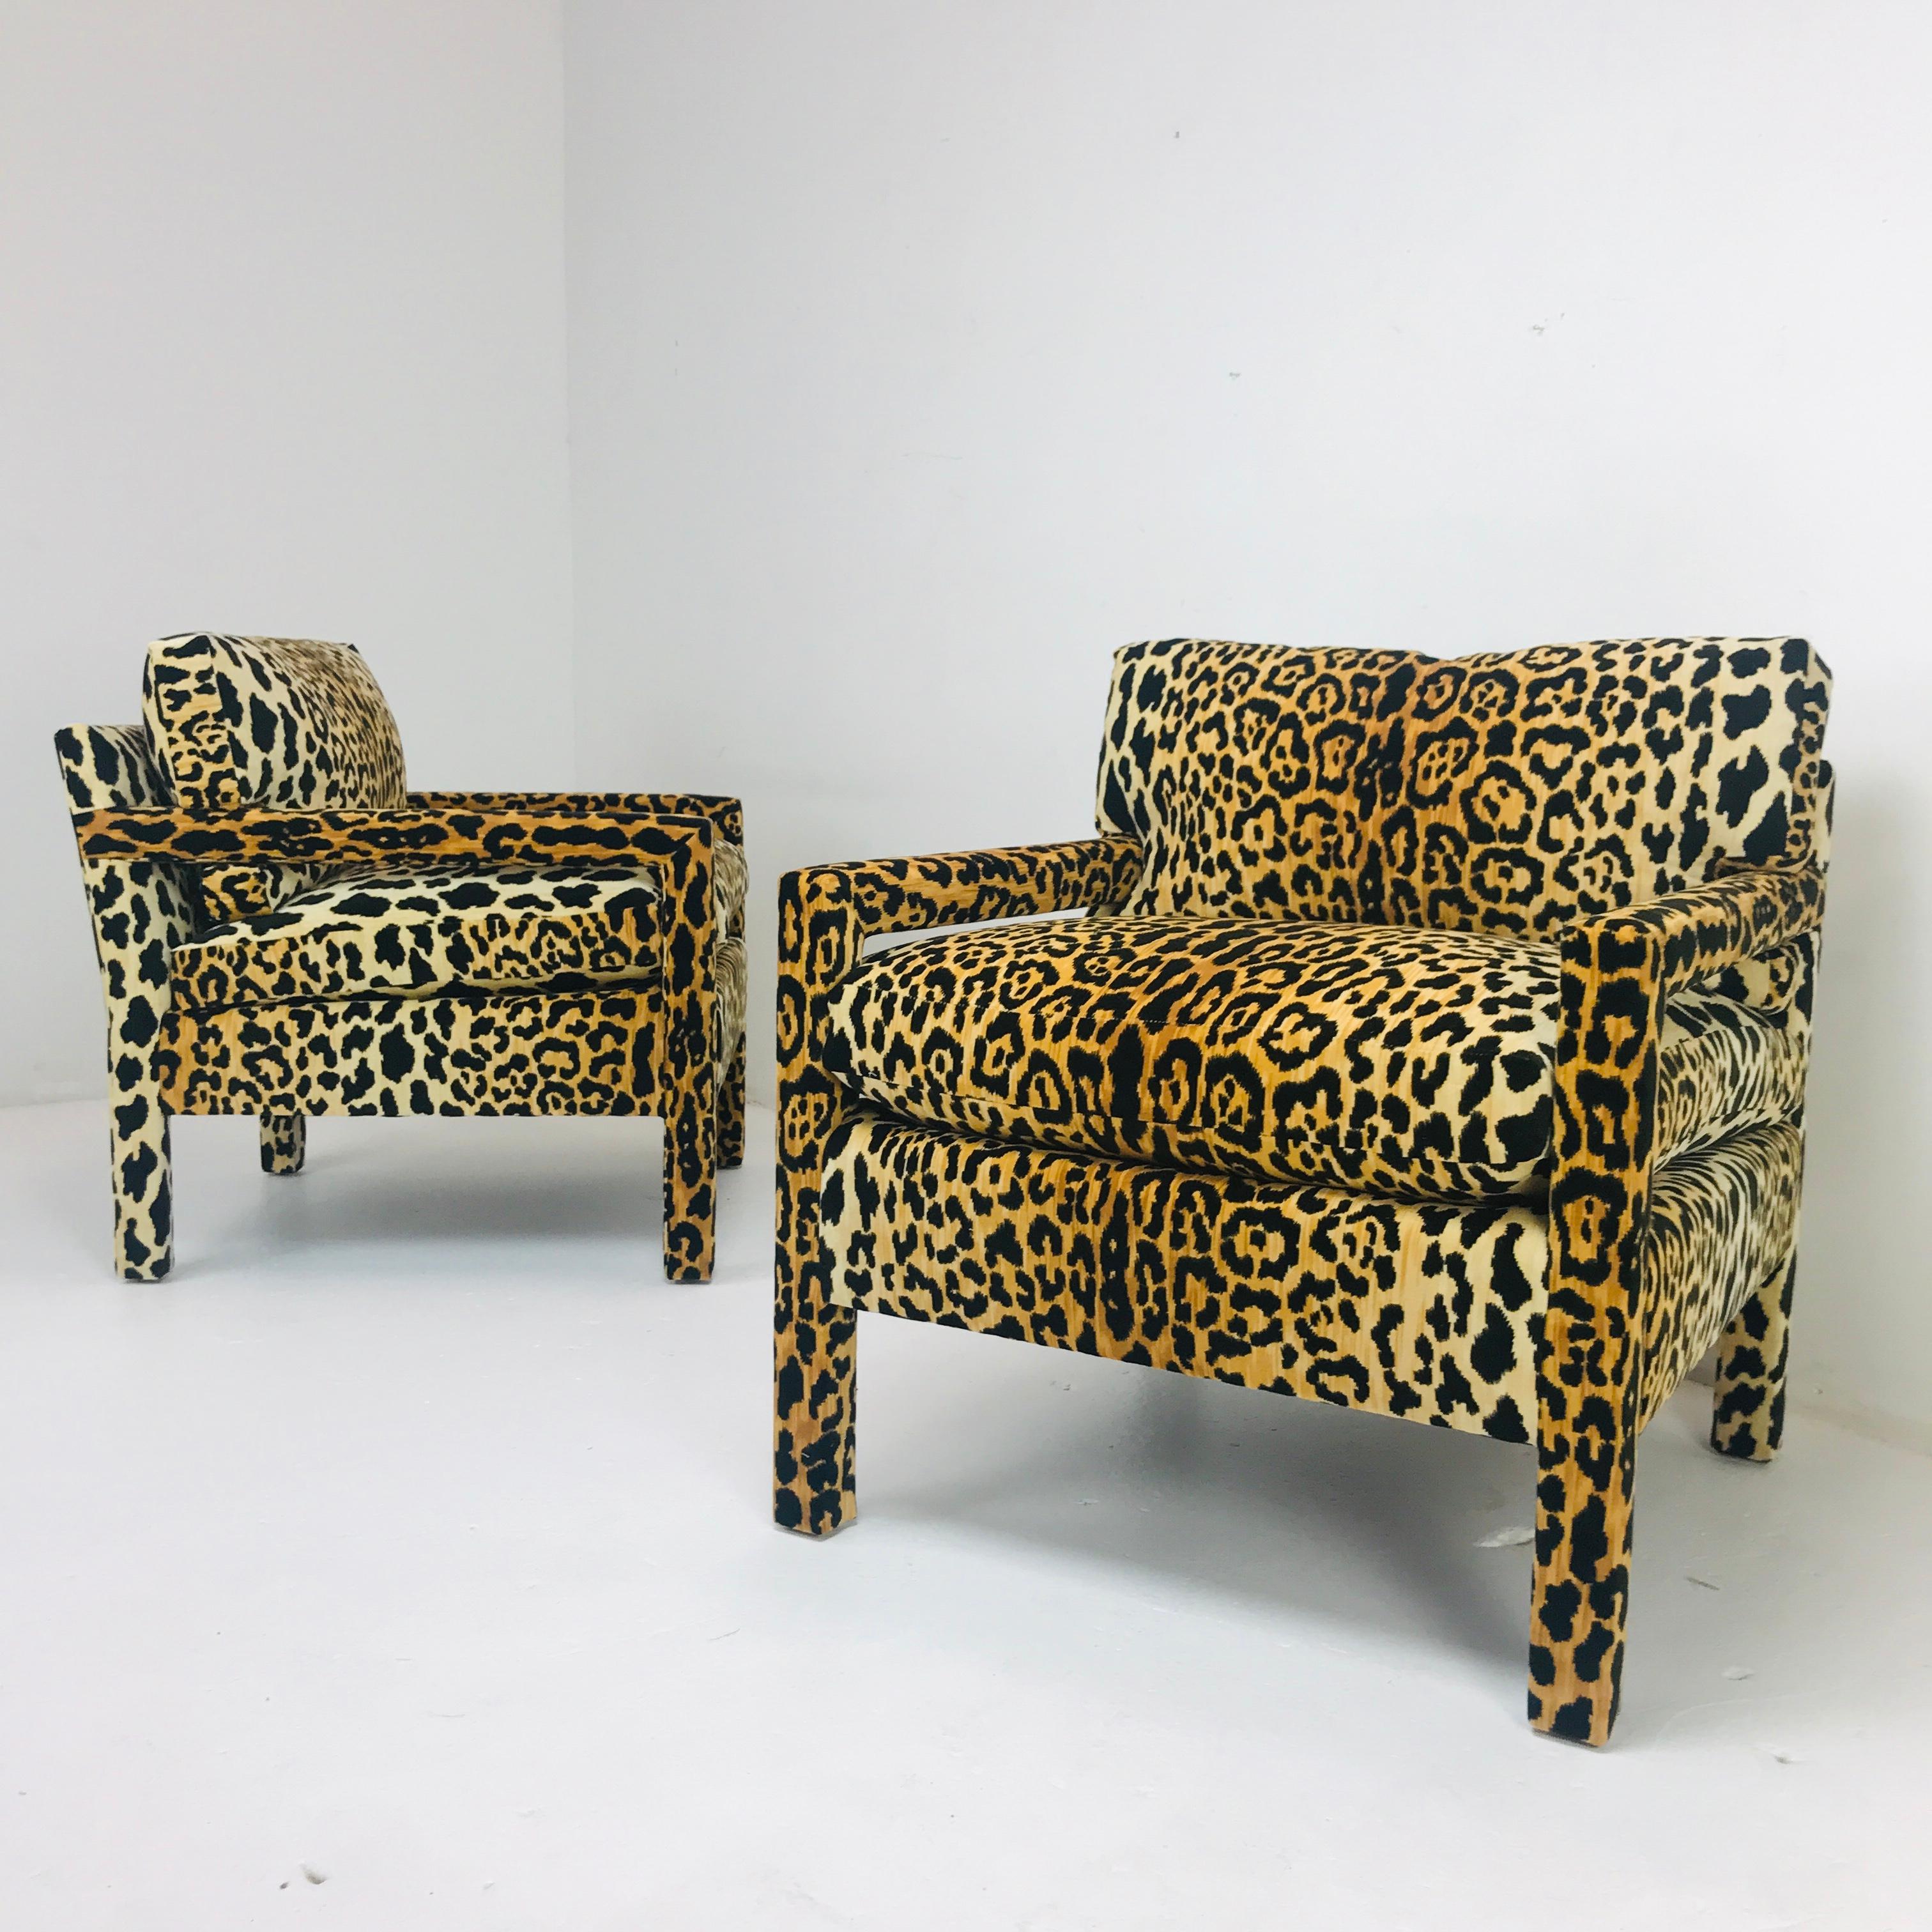 Pair of custom stylish parsons armchairs in the style of Milo Baughman. Newly upholstered in a fun-sophisticated leopard upholstery fabric. Down wrapped seat cushion with down back cushion make these chairs ultra comfortable. Available at $5800 (as